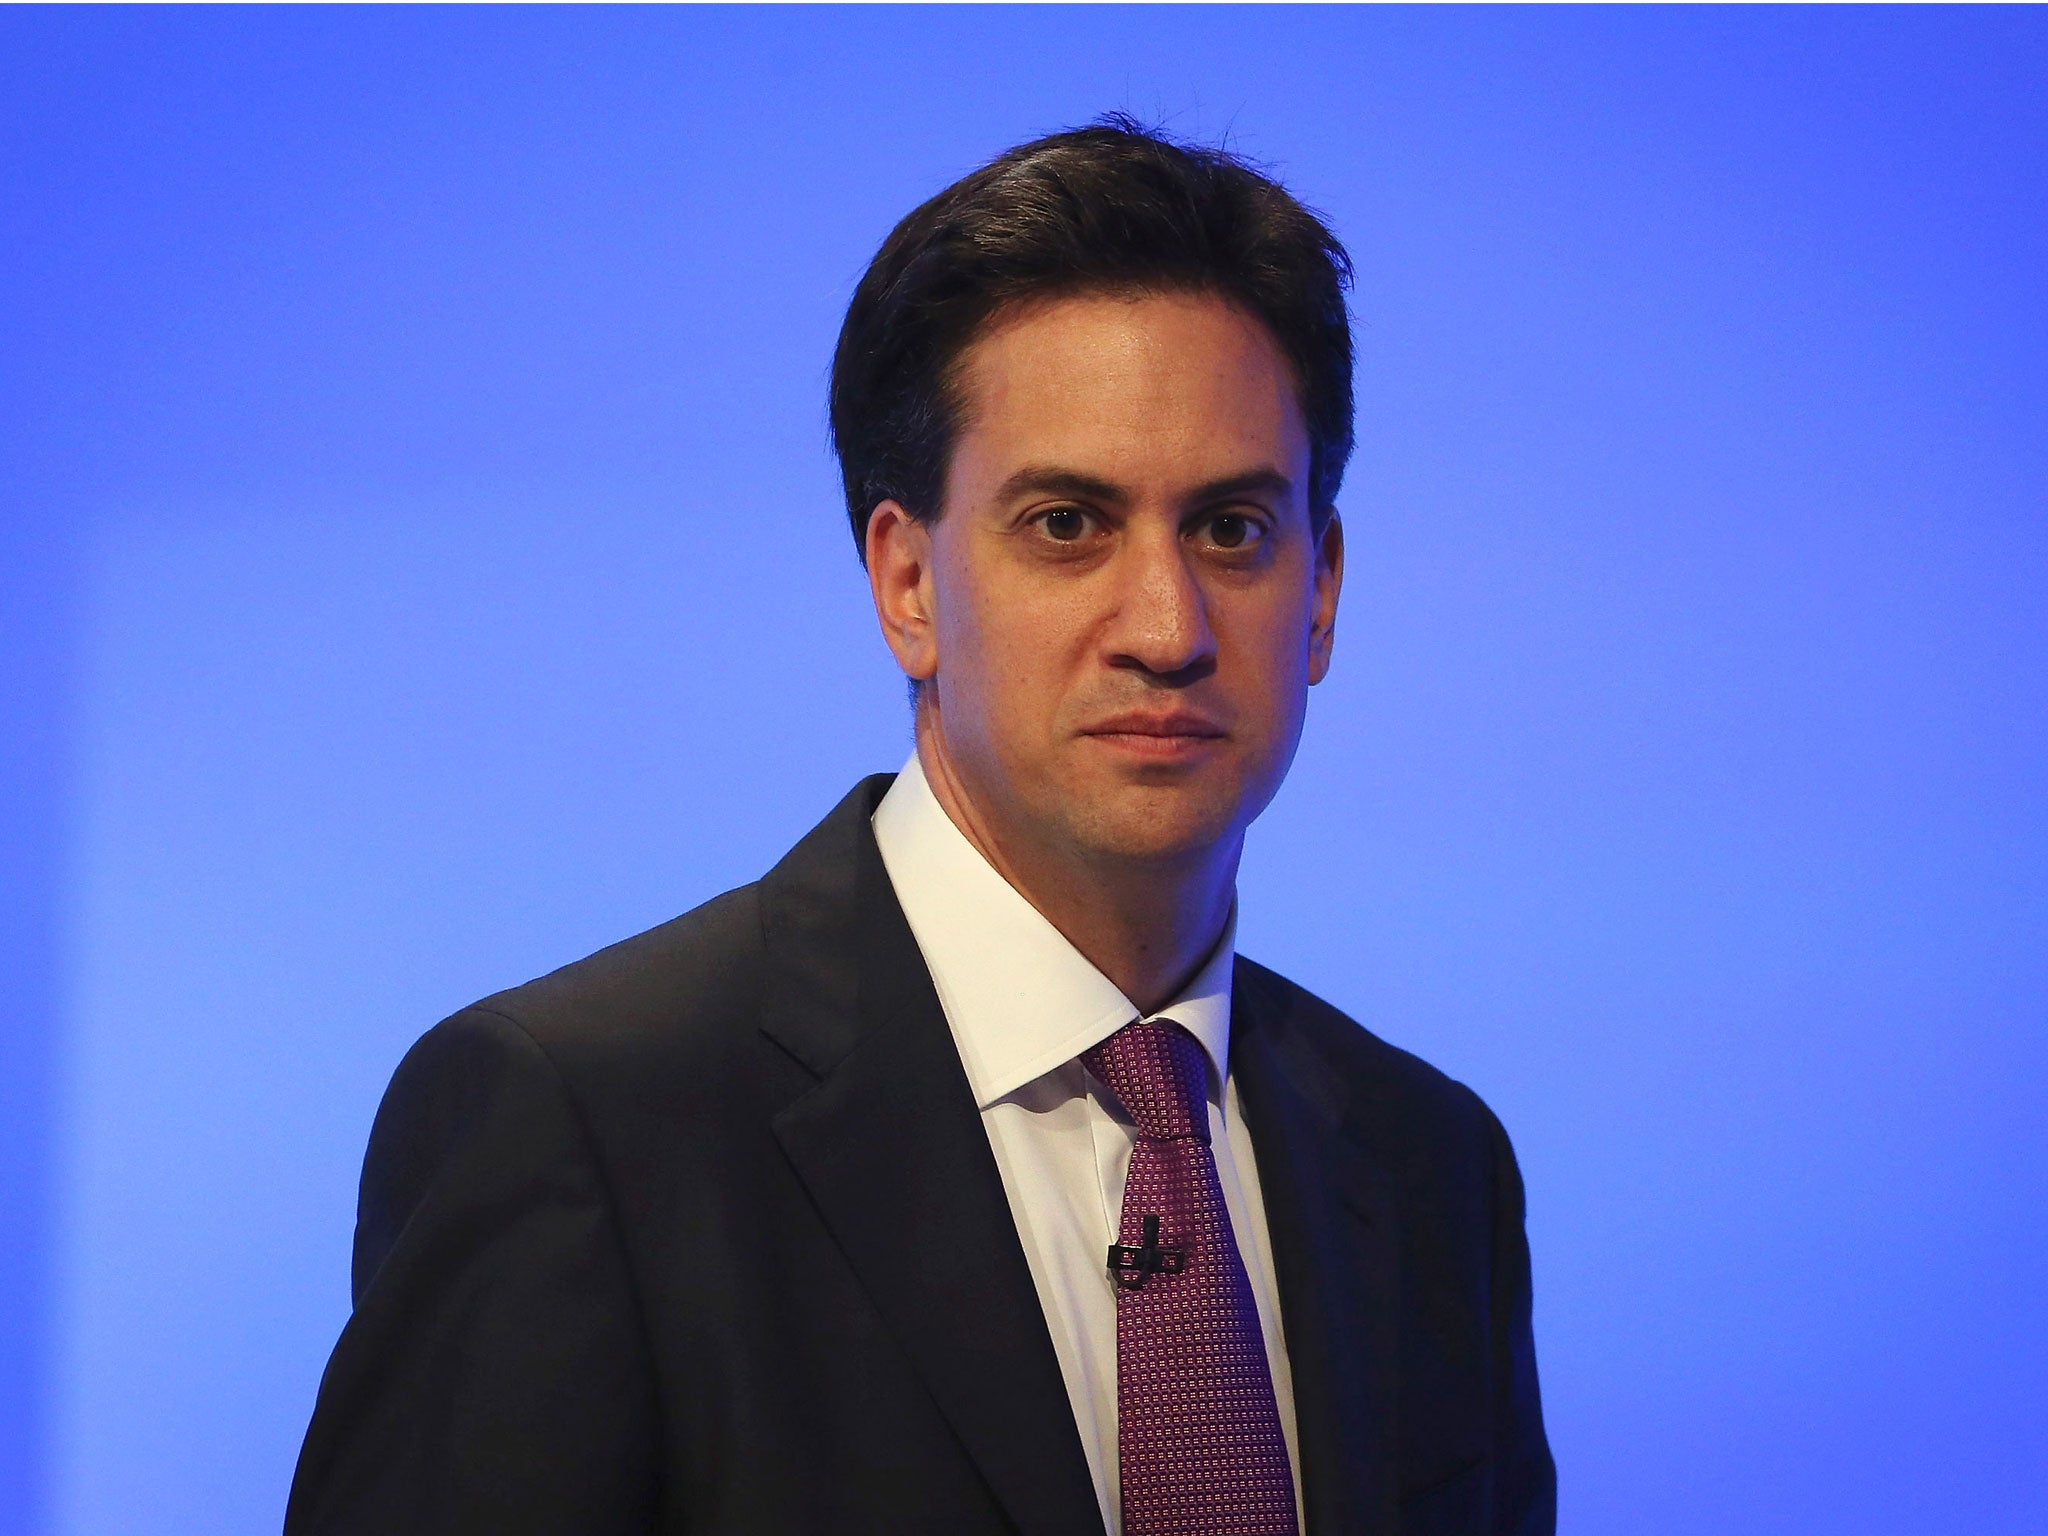 The Tories had accused Ed Miliband of failing to tackle trade union influence